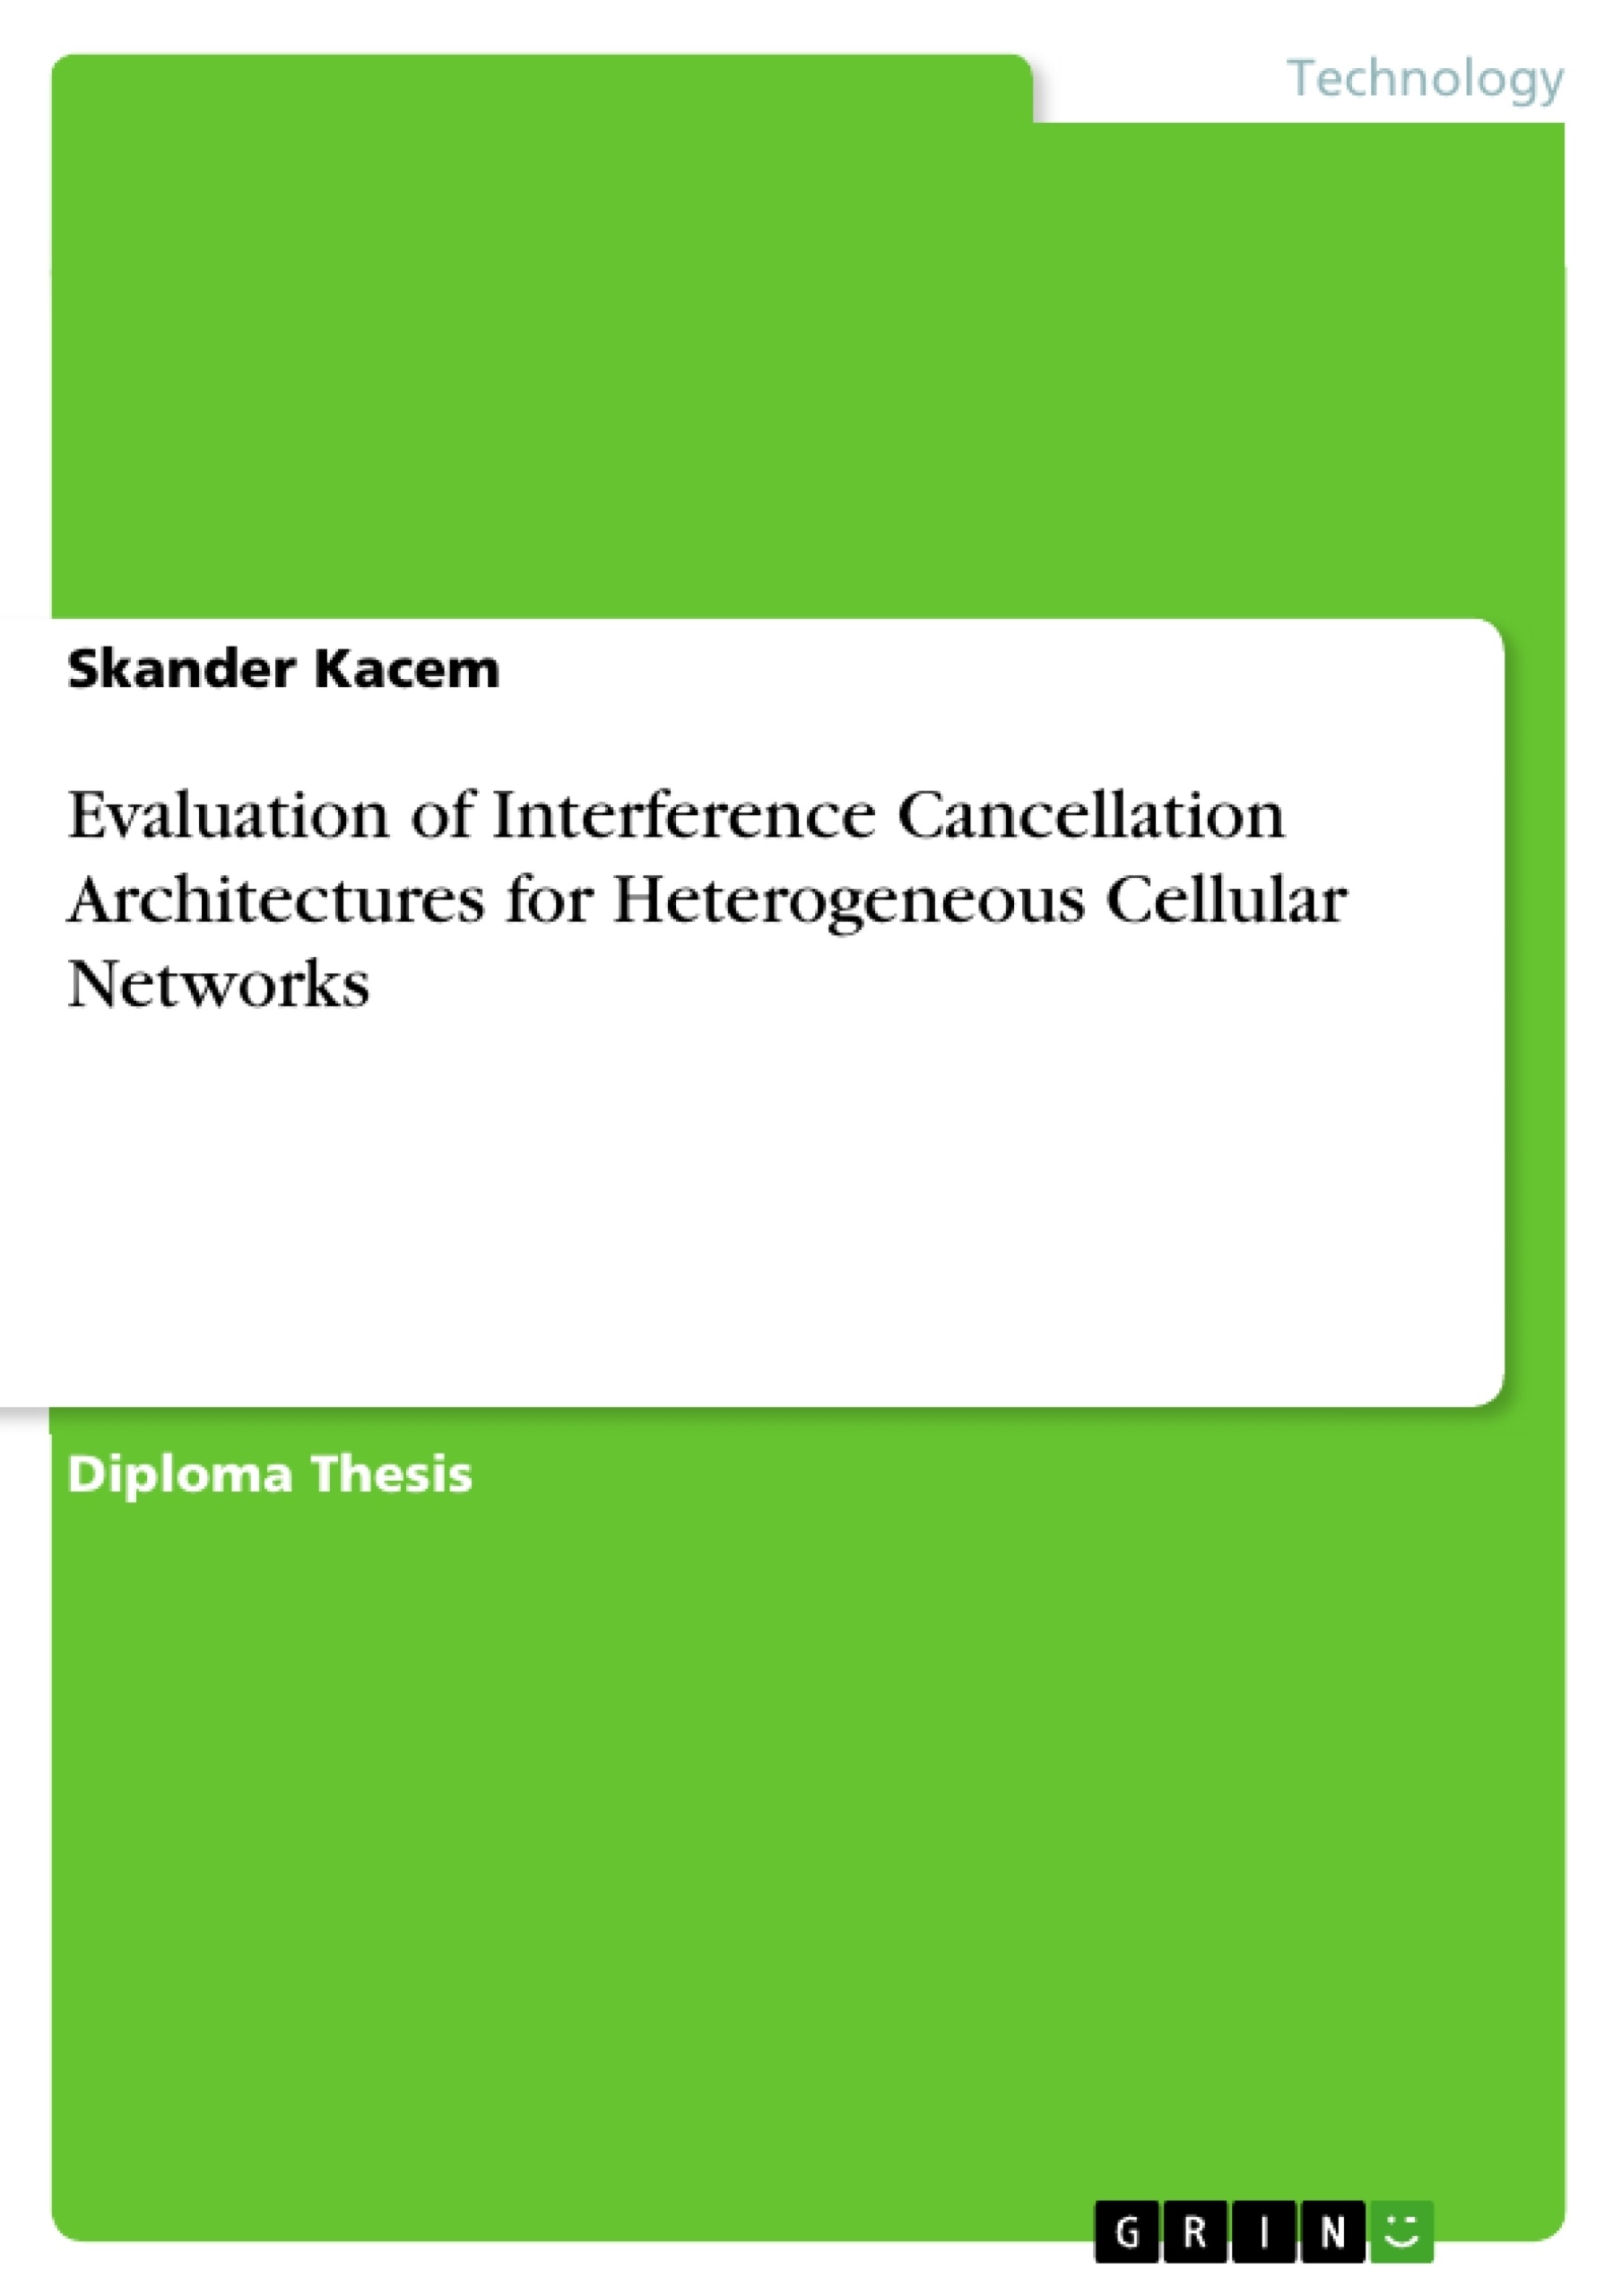 Título: Evaluation of Interference Cancellation Architectures for Heterogeneous Cellular Networks